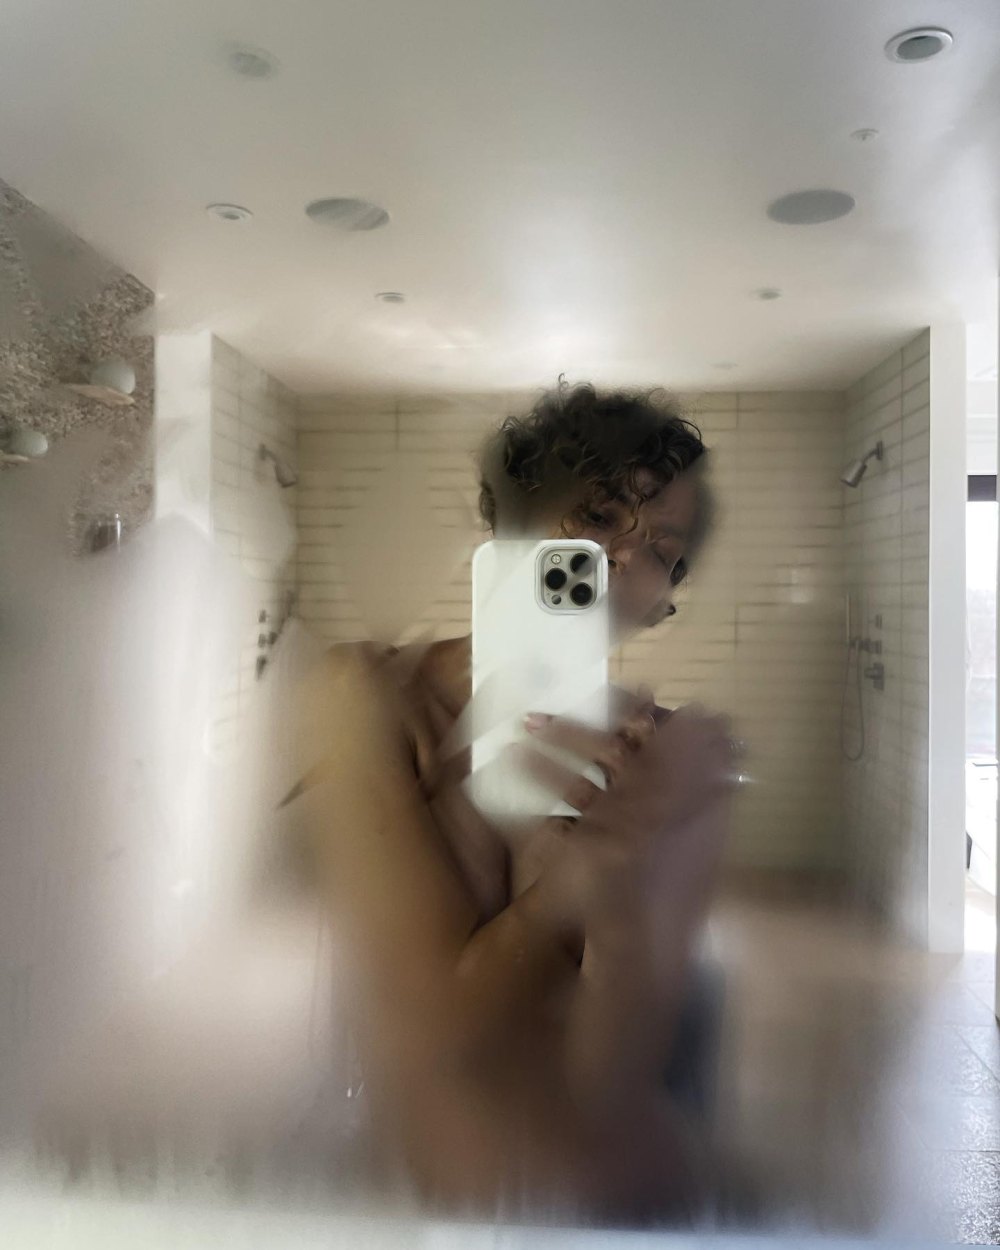 Halle Berry Shows Off Naked Body in a Steamy Shower Selfie